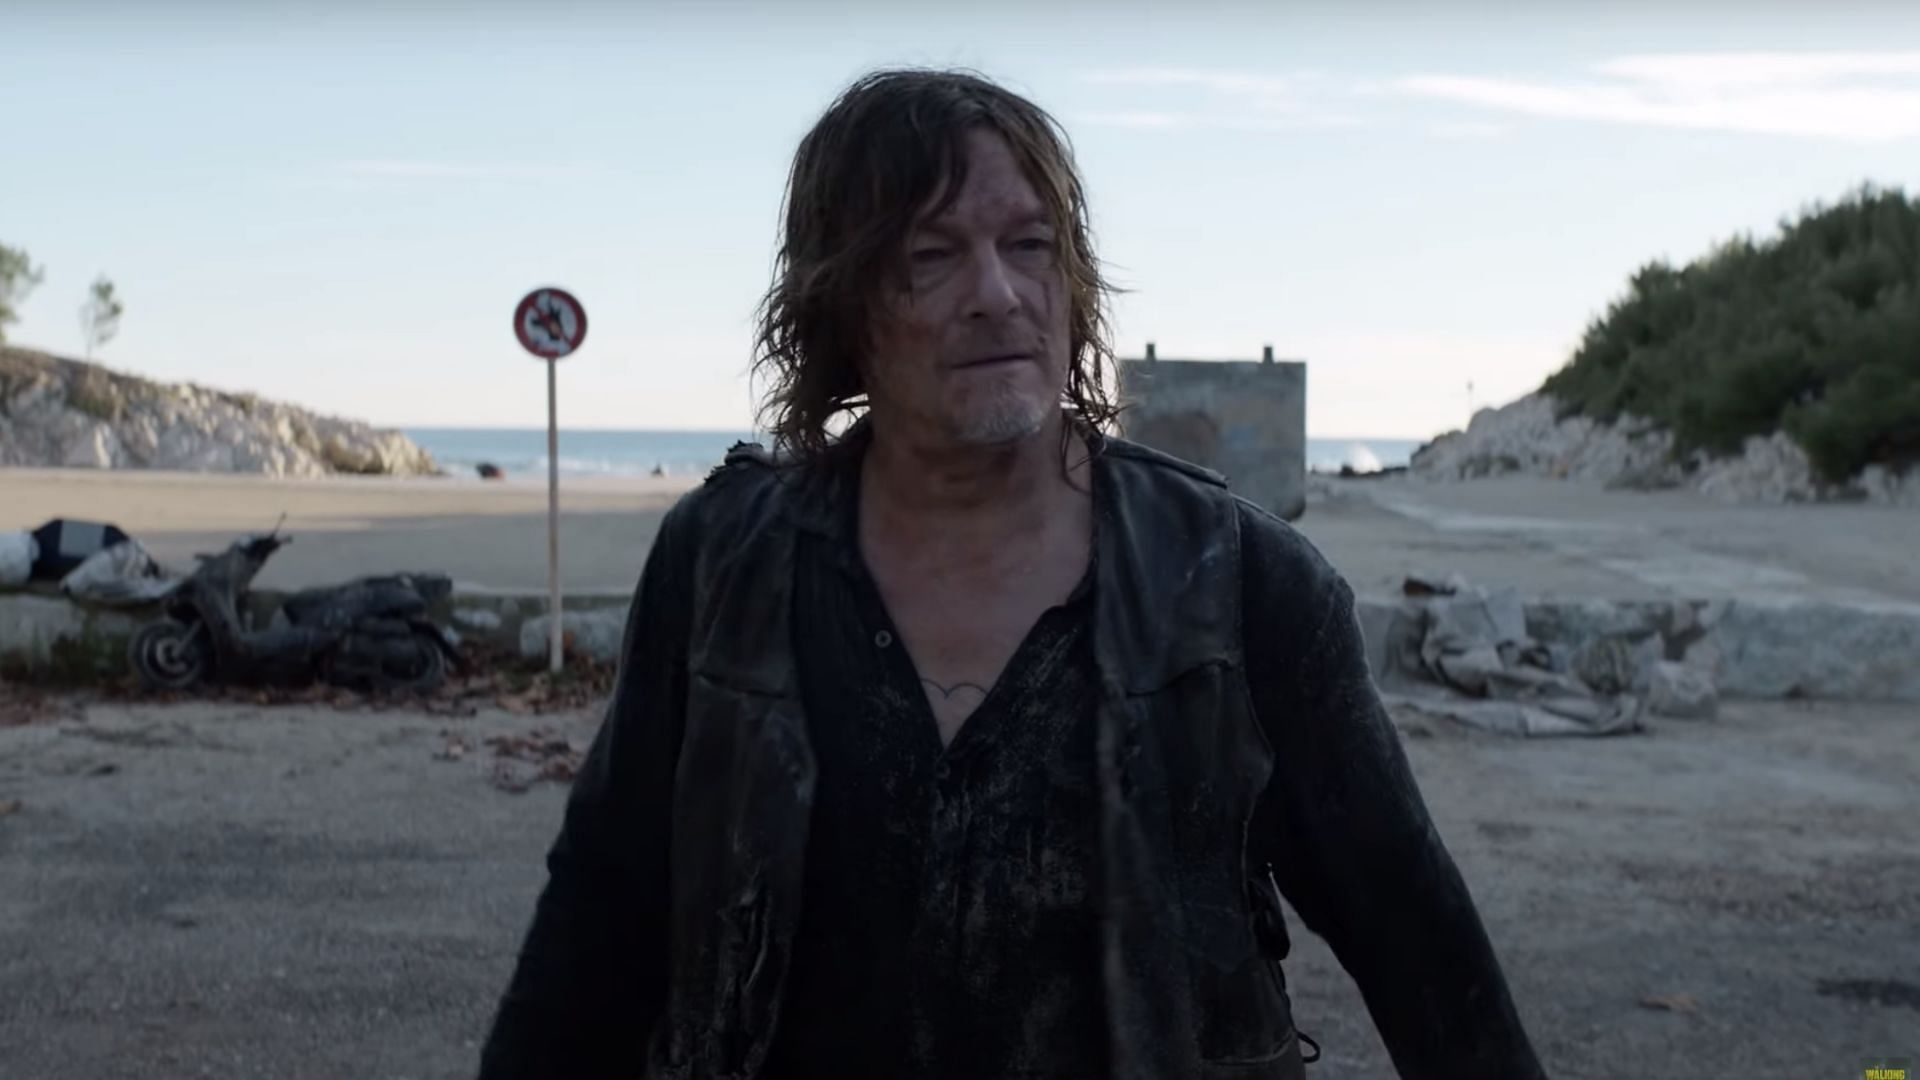 Daryl Dixon of The Walking Dead is arriving in Paris in a new teaser (Image via AMC)